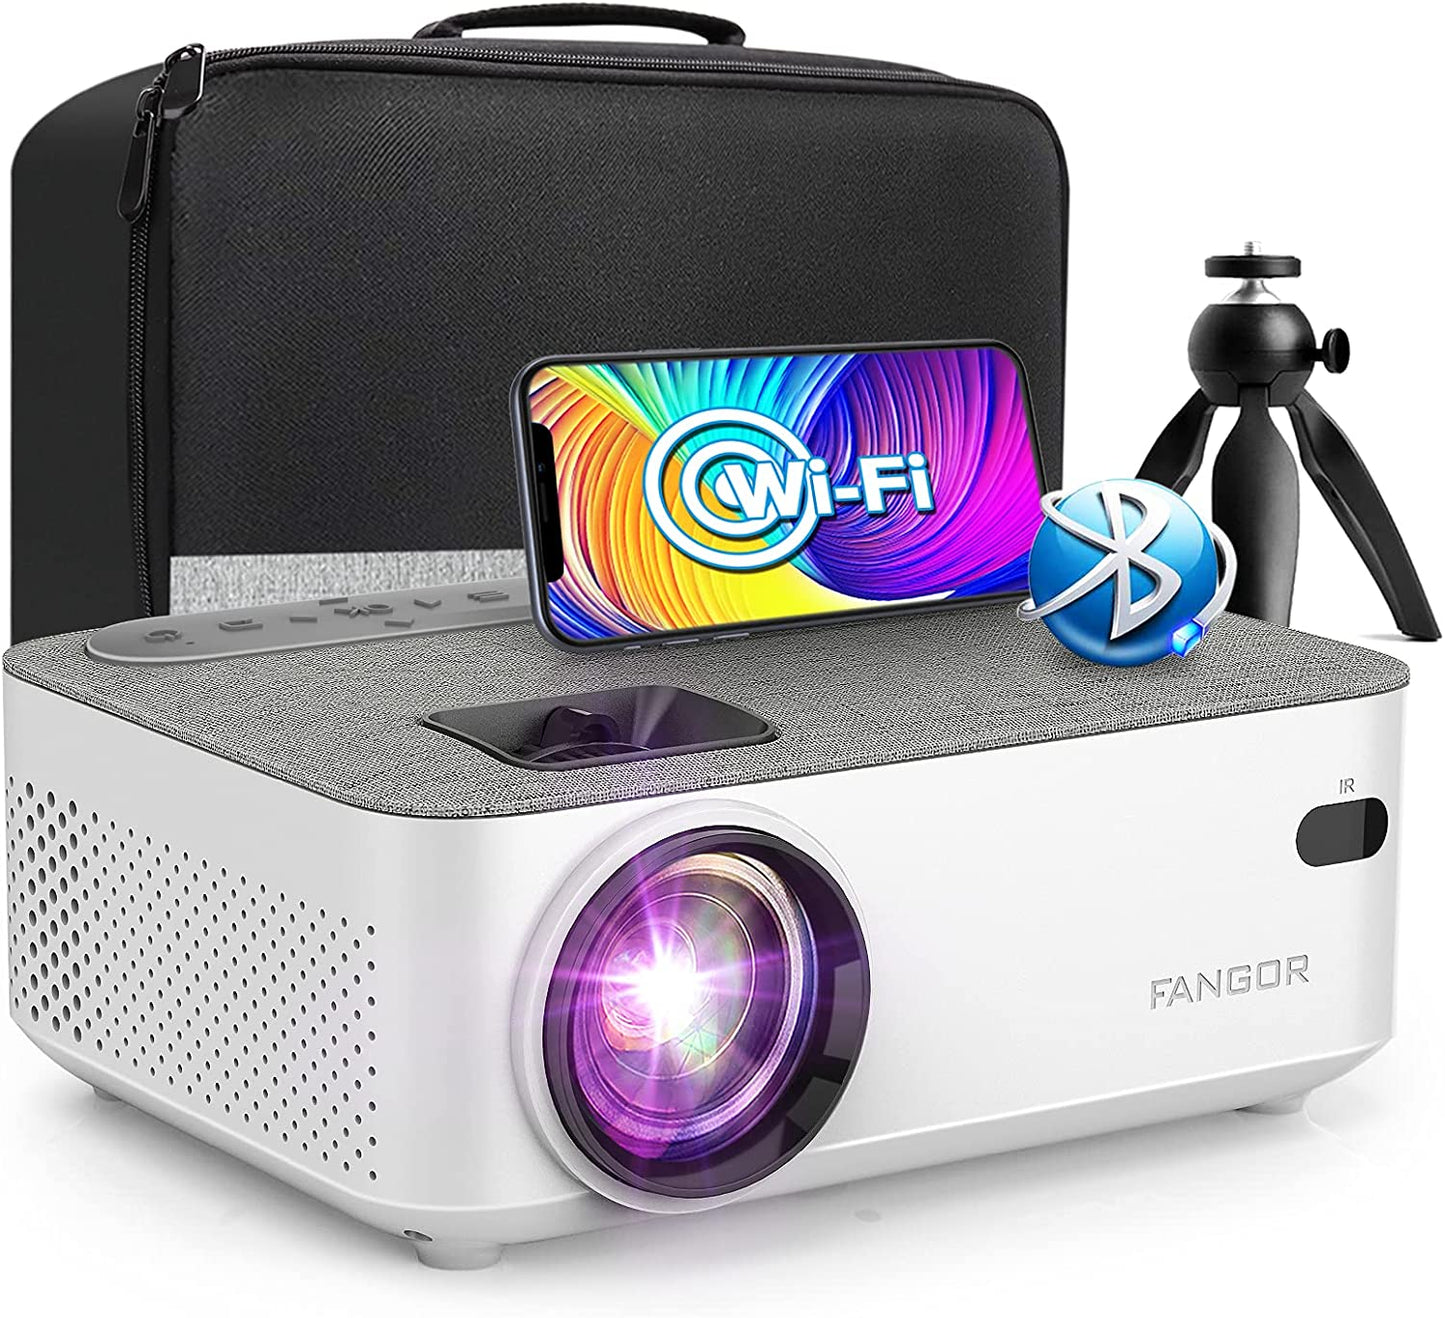 Mini WiFi Projector with Bluetooth - 1080P Supported Outdoor Movie Projector for Home Theater, FANGOR Portable Video Projector with HDMI USB VGA AV Interfaces [Tripod and Carry Bag Included]